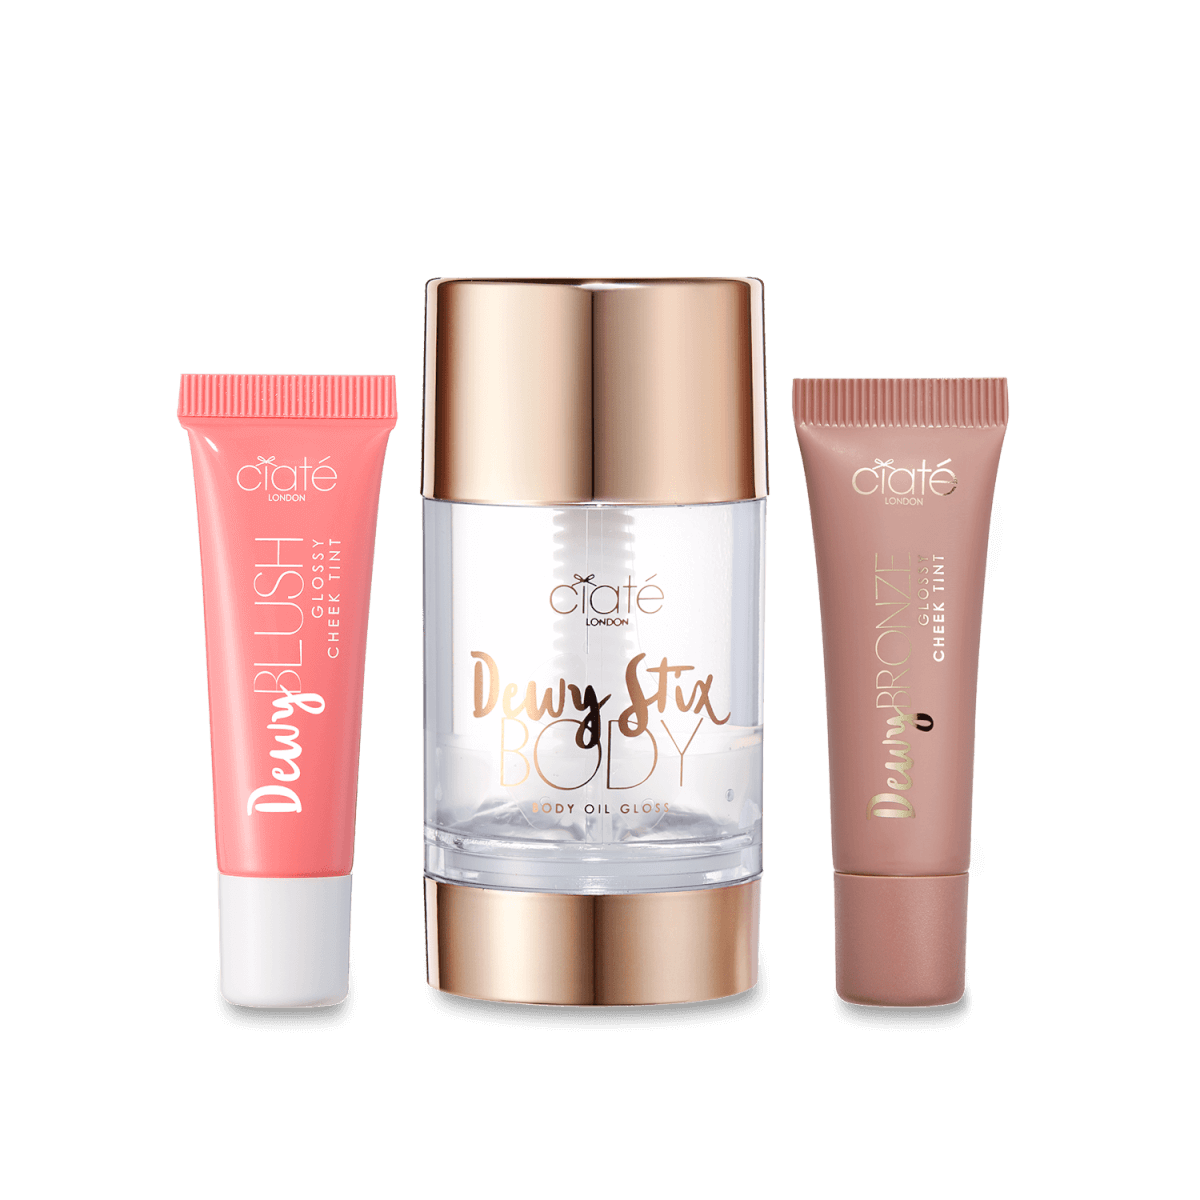 Ciate London - The Dewy Gift Set Only £30.80 (Worth £58)